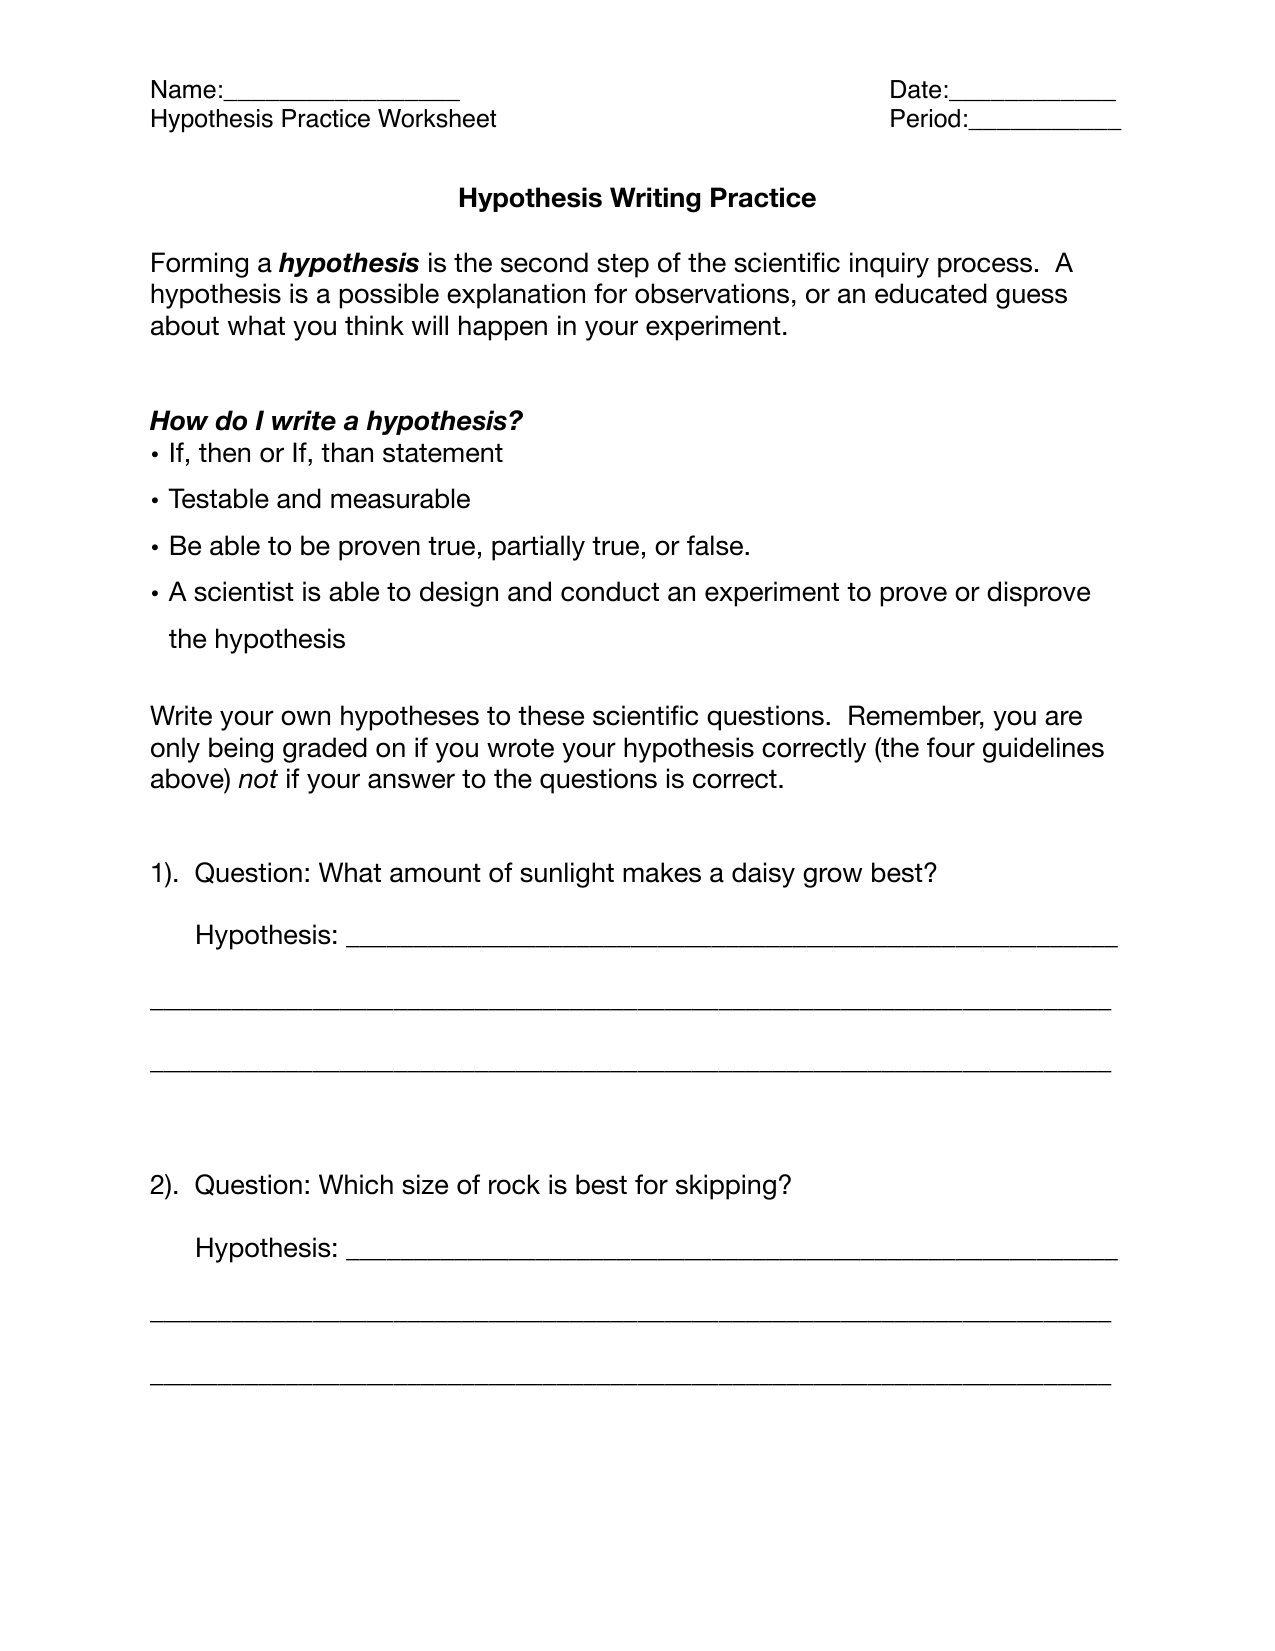 how to write a hypothesis in science worksheet